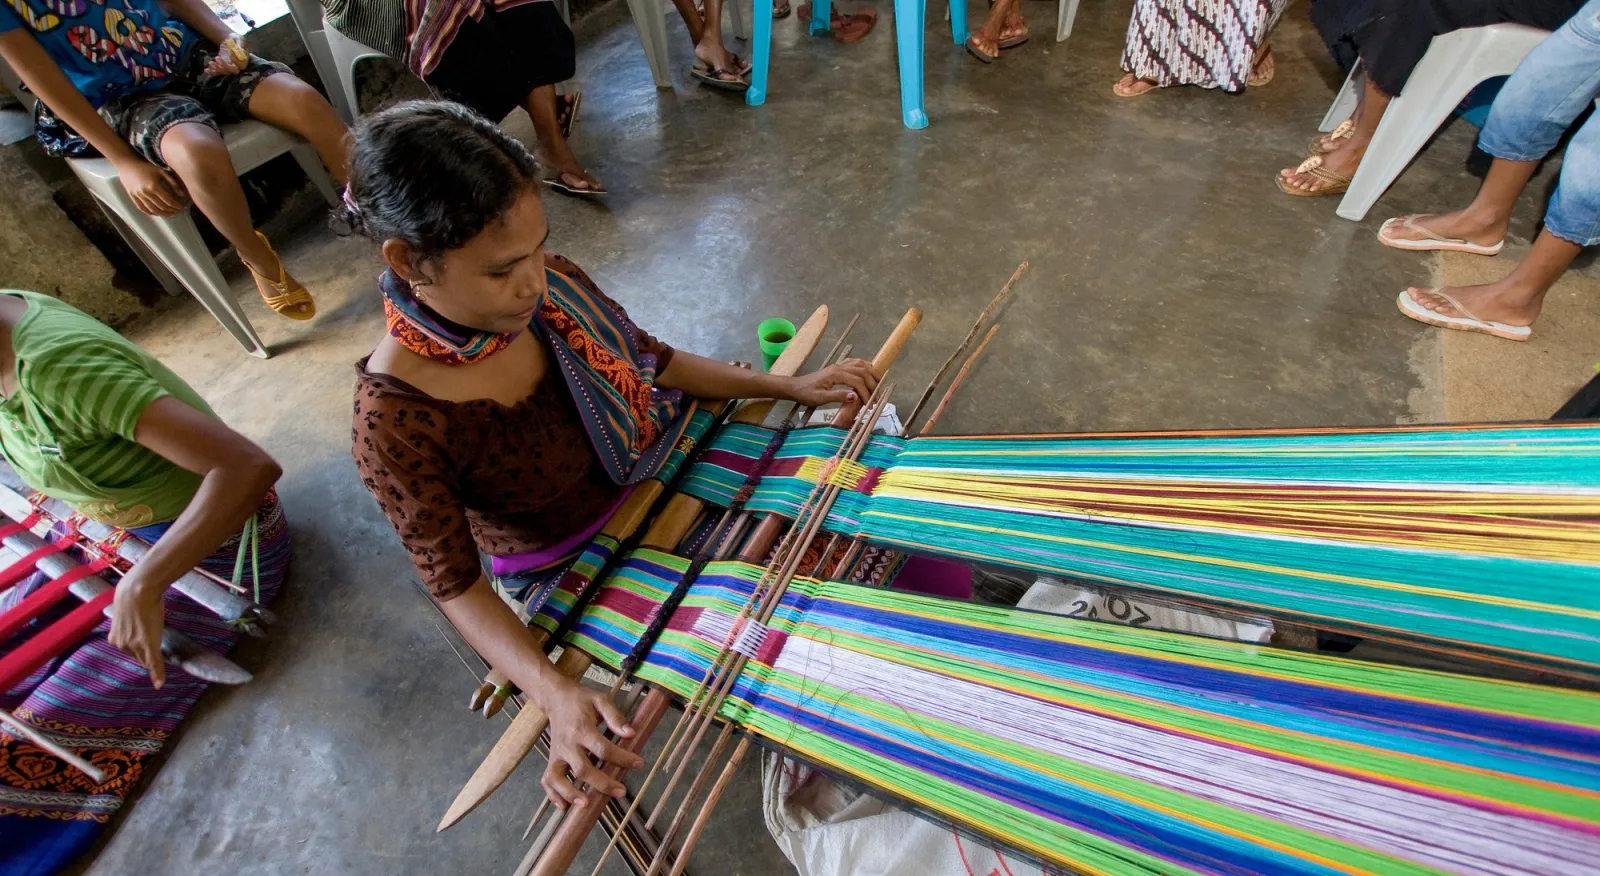 A woman skillfully creating vibrant fabric using a traditional weaving machine. You can see other people sitting further back in the photo, watching her work.